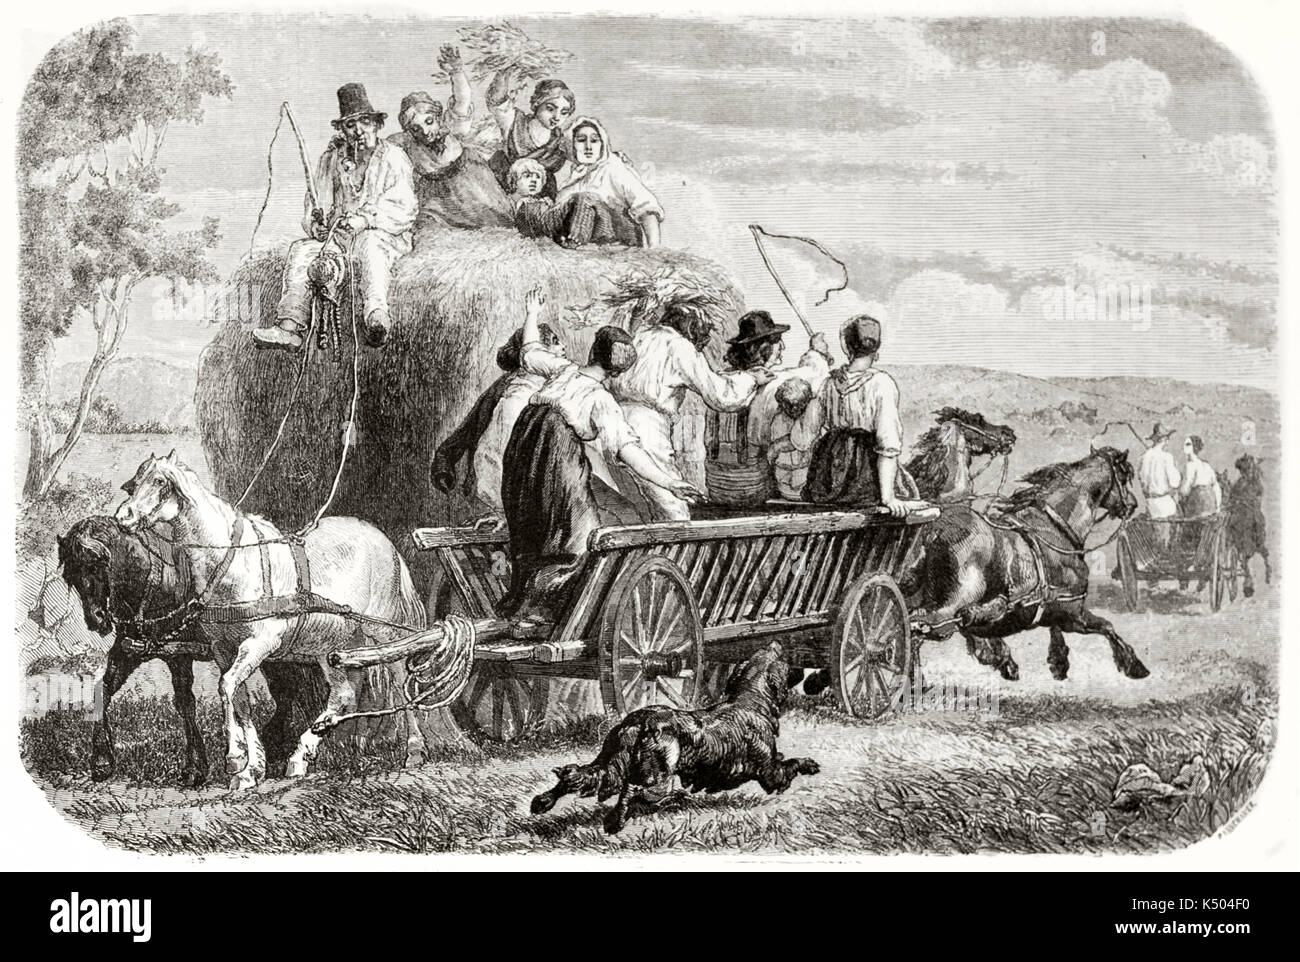 Ancient farmer family on a bale of hay on a wagon carried by horses in a rural context. Haymaking in Funen island Denmark. Created by Frolik published on Le Tour du Monde Paris 1862 Stock Photo